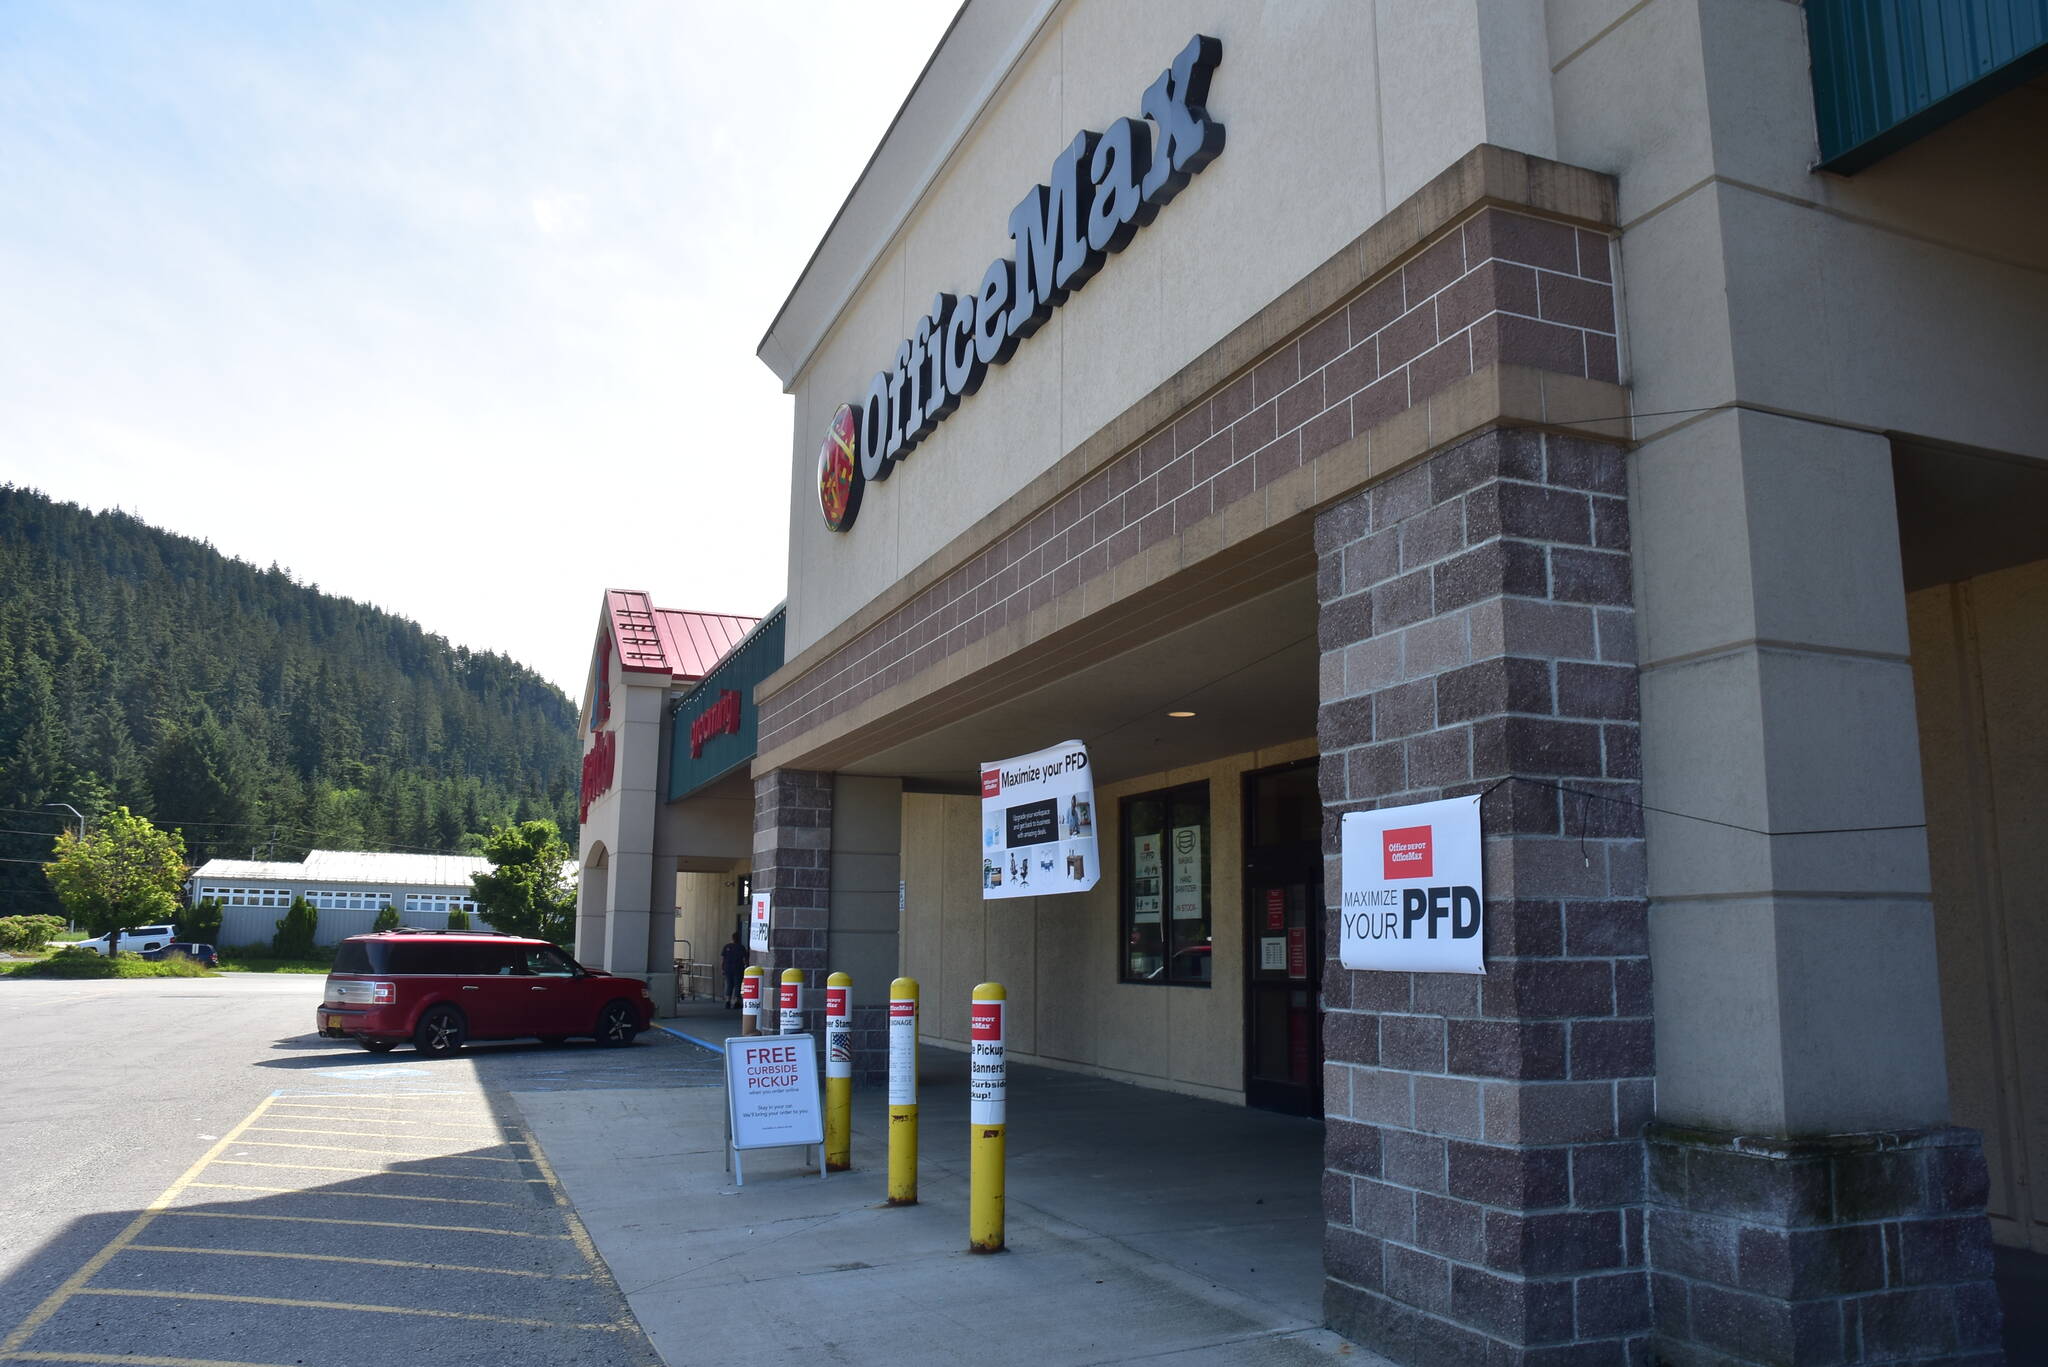 Office Max at the Nugget Mall in the Mendenhall Valley advertised Permanent Fund dividend sales on Thursday, July 2, 2020. This year's PFD will be  $1,114, the Alaska Department of Revenue announced. (Peter Segall / Juneau Empire File)